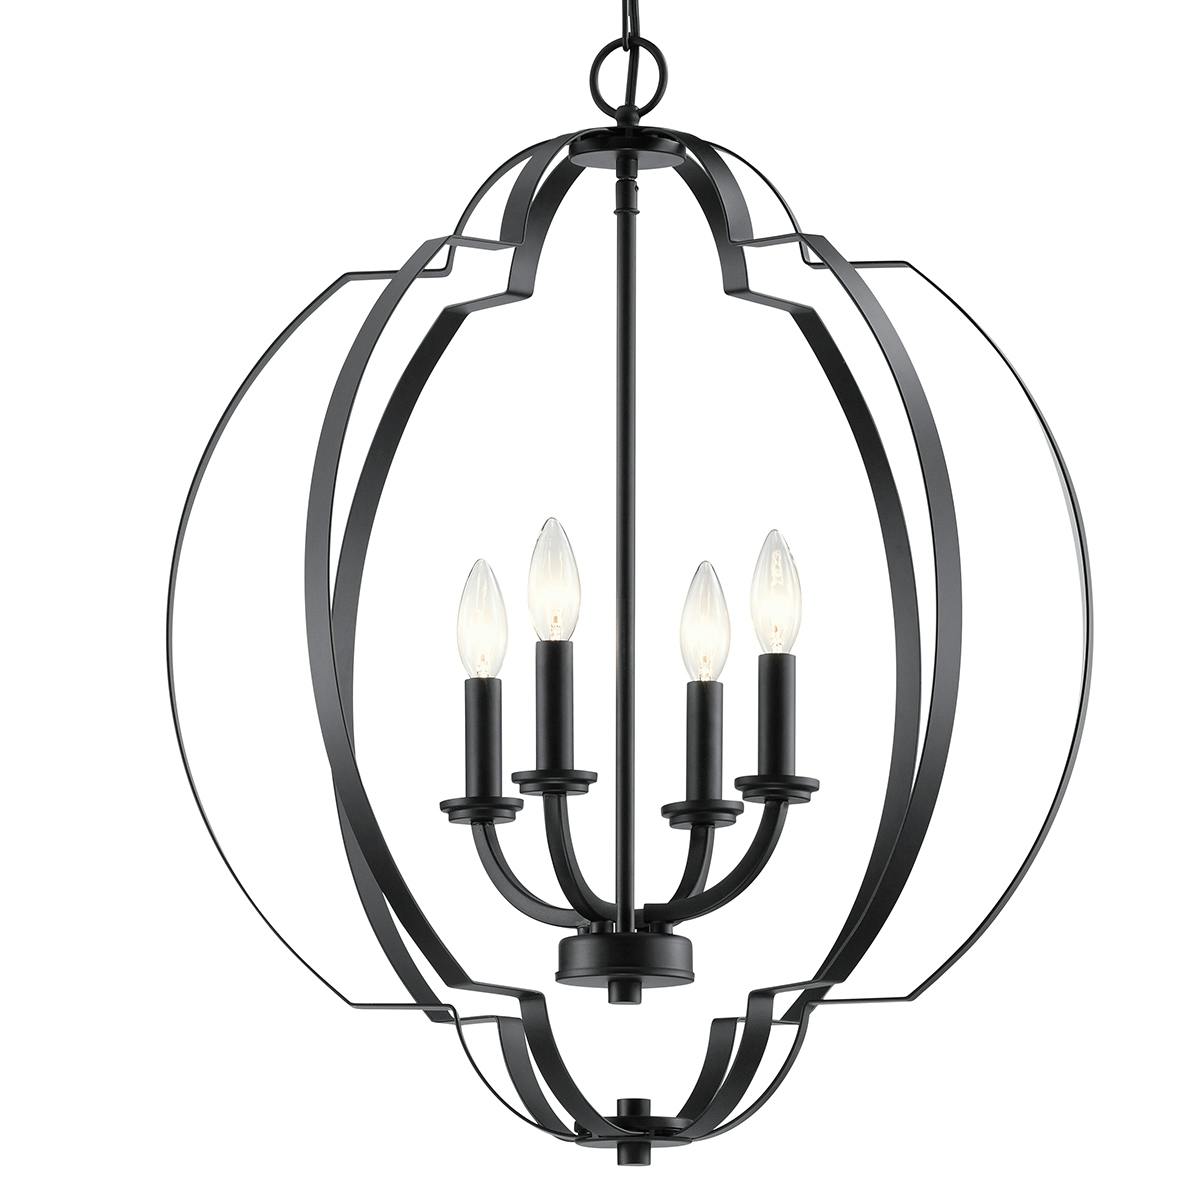 Close up view of the Voleta 26.25" 4 Light Foyer Pendant Black on a white background